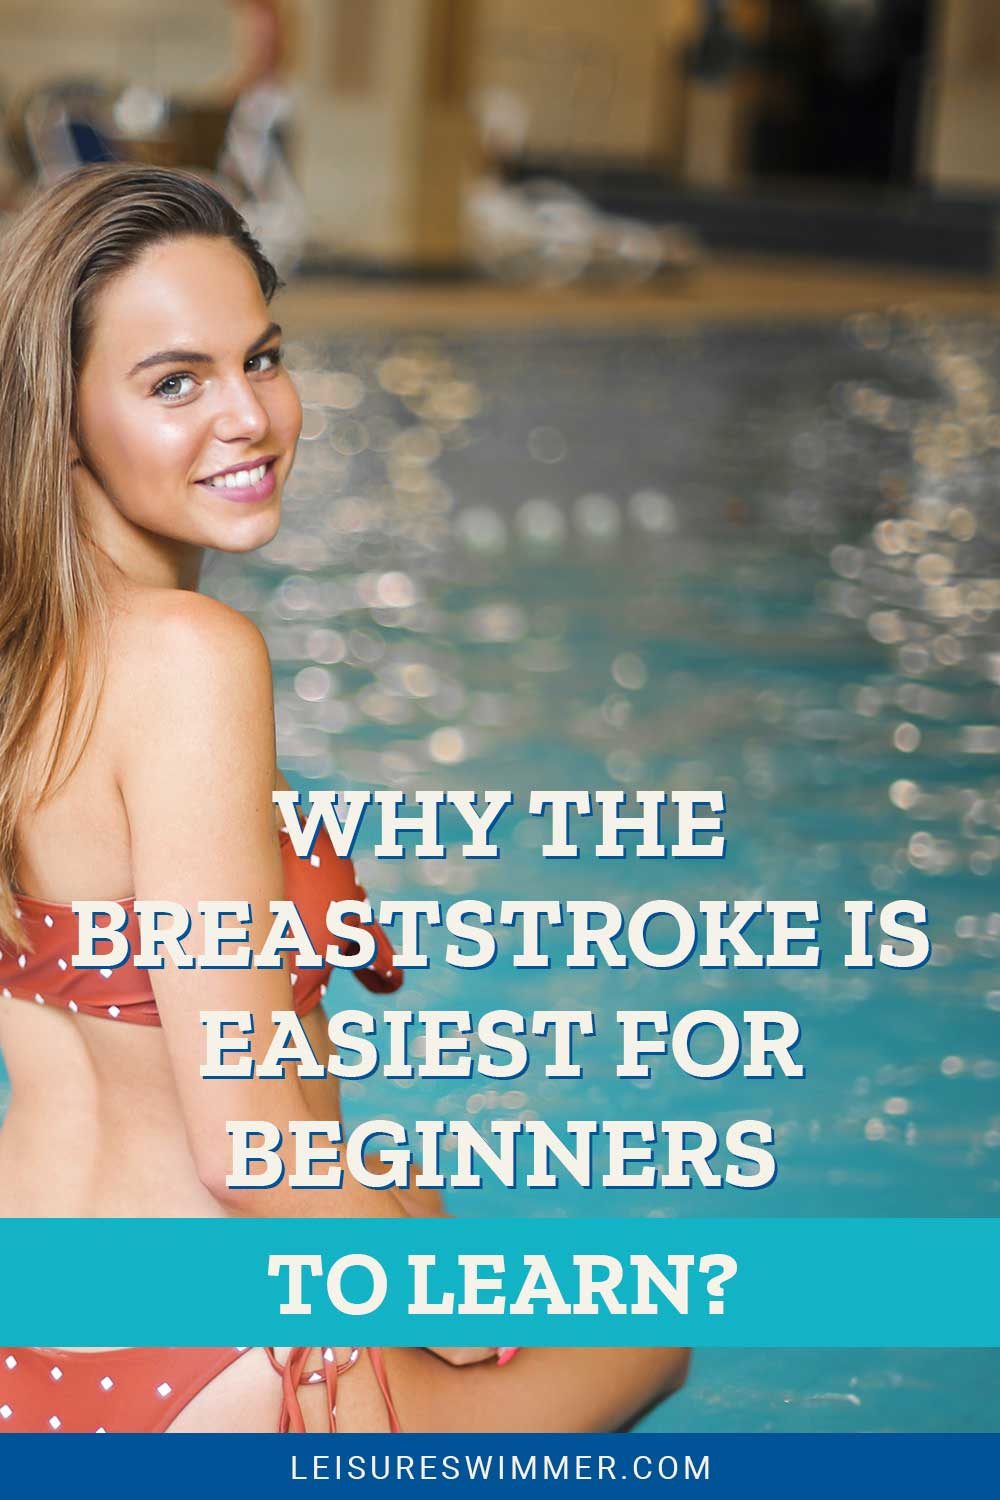 Girl smiling sitting near a pool - Why The Breaststroke Is Easiest For Beginners To Learn?